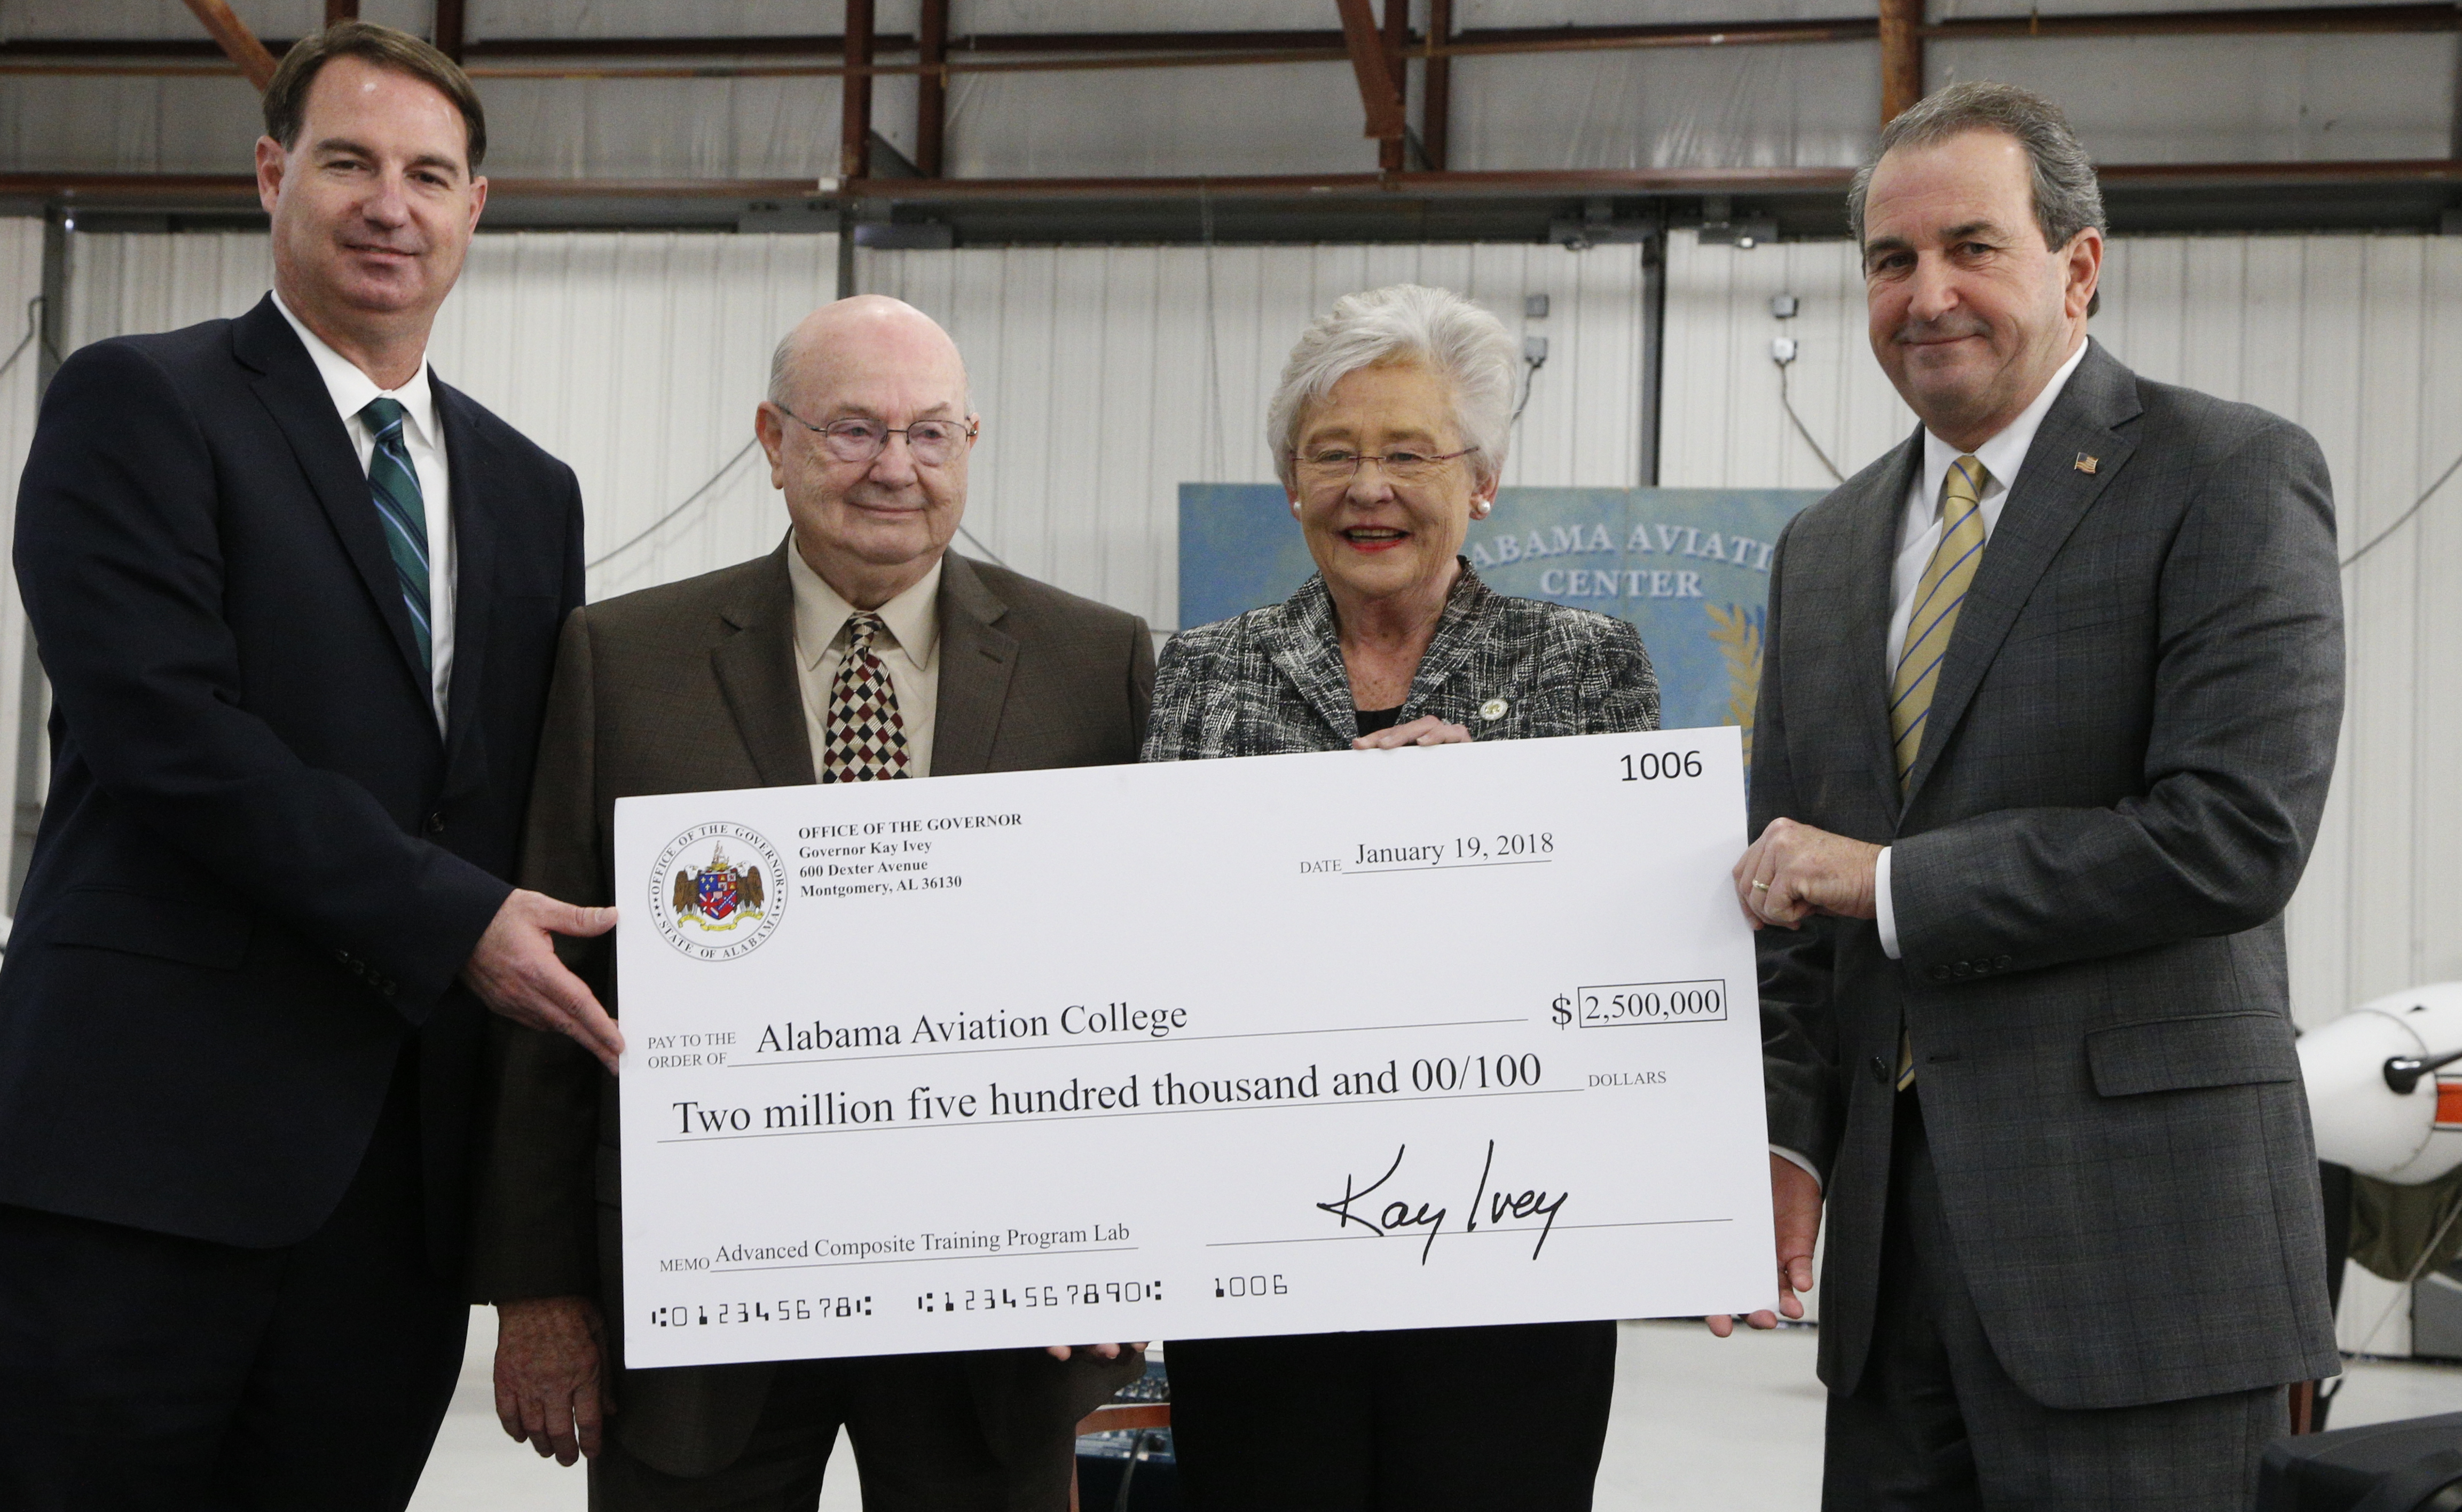 Governor Ivey Announces $2.5 Million Grant for Alabama Aviation College Expansion